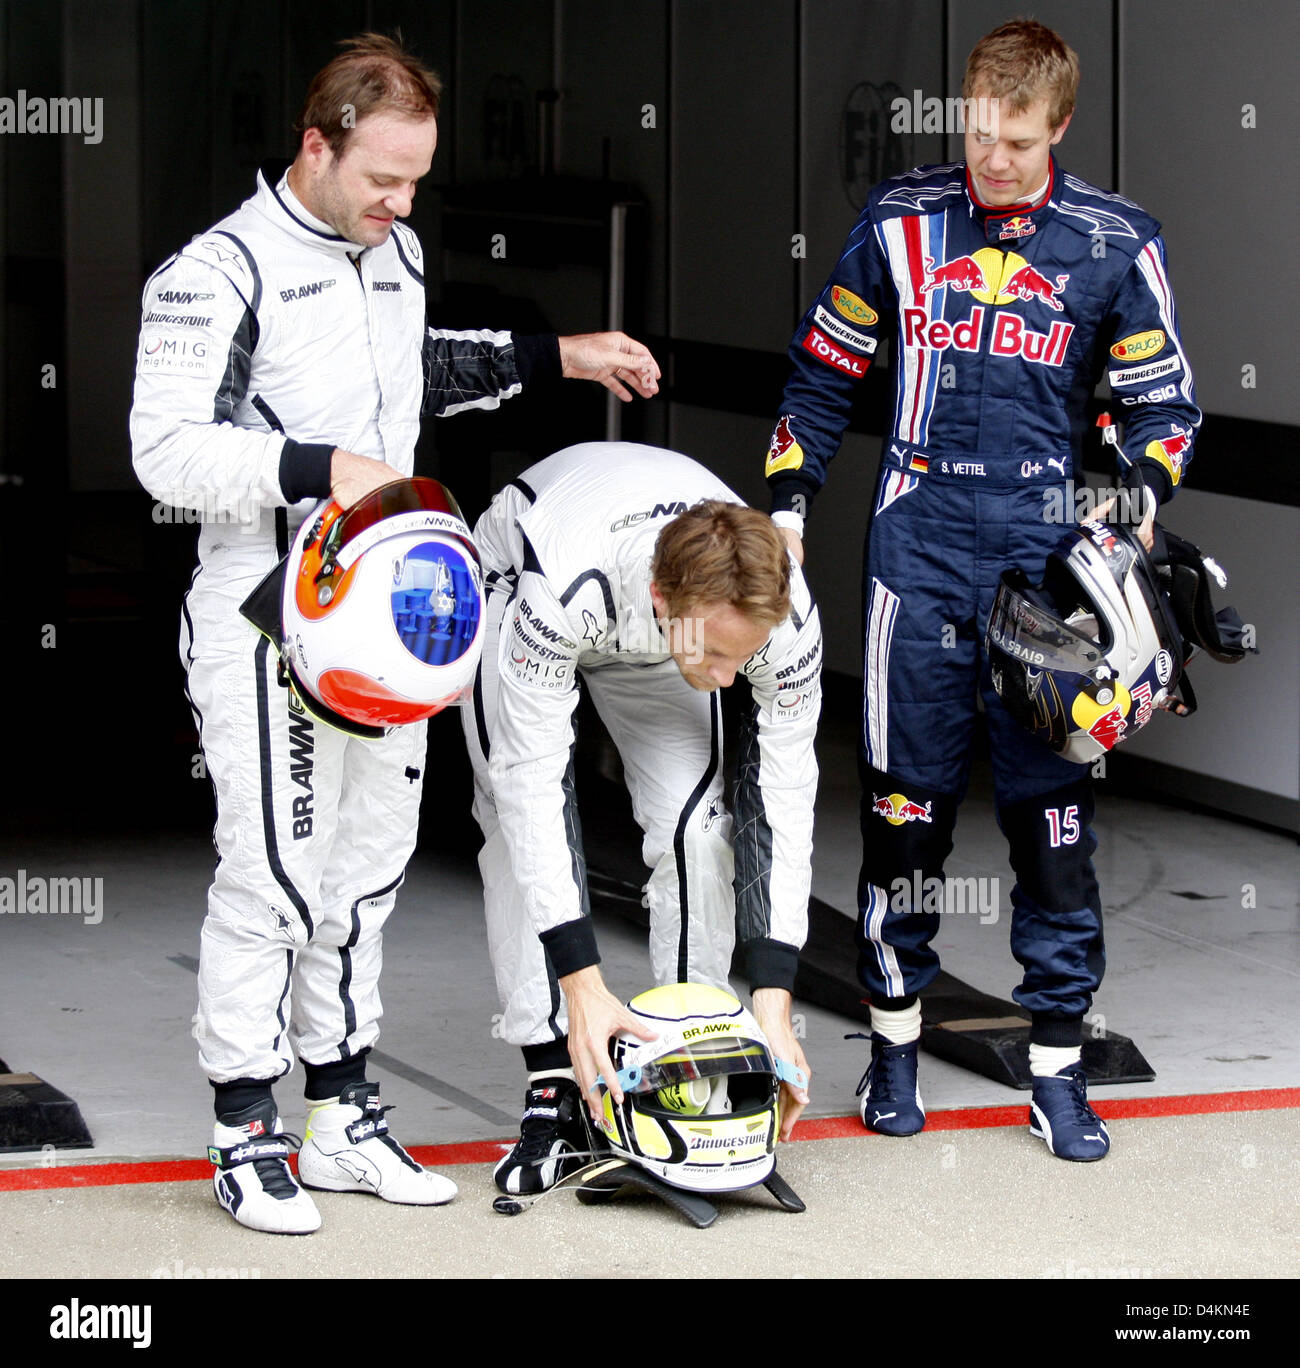 British Formula One driver Jenson Button of Brawn GP (C) puts his helmet on the ground next to German Formula One driver Sebastian Vettel of Red Bull (R) and Brazilian Formula One driver Rubens Barrichello of Brawn GP (L) after the qualifying at Circuit de Catalunya in Montmelo near Barcelona, Spain, 09 May 2009. The Formula One Grand Prix of Spain will take place on 10 May 2009. P Stock Photo